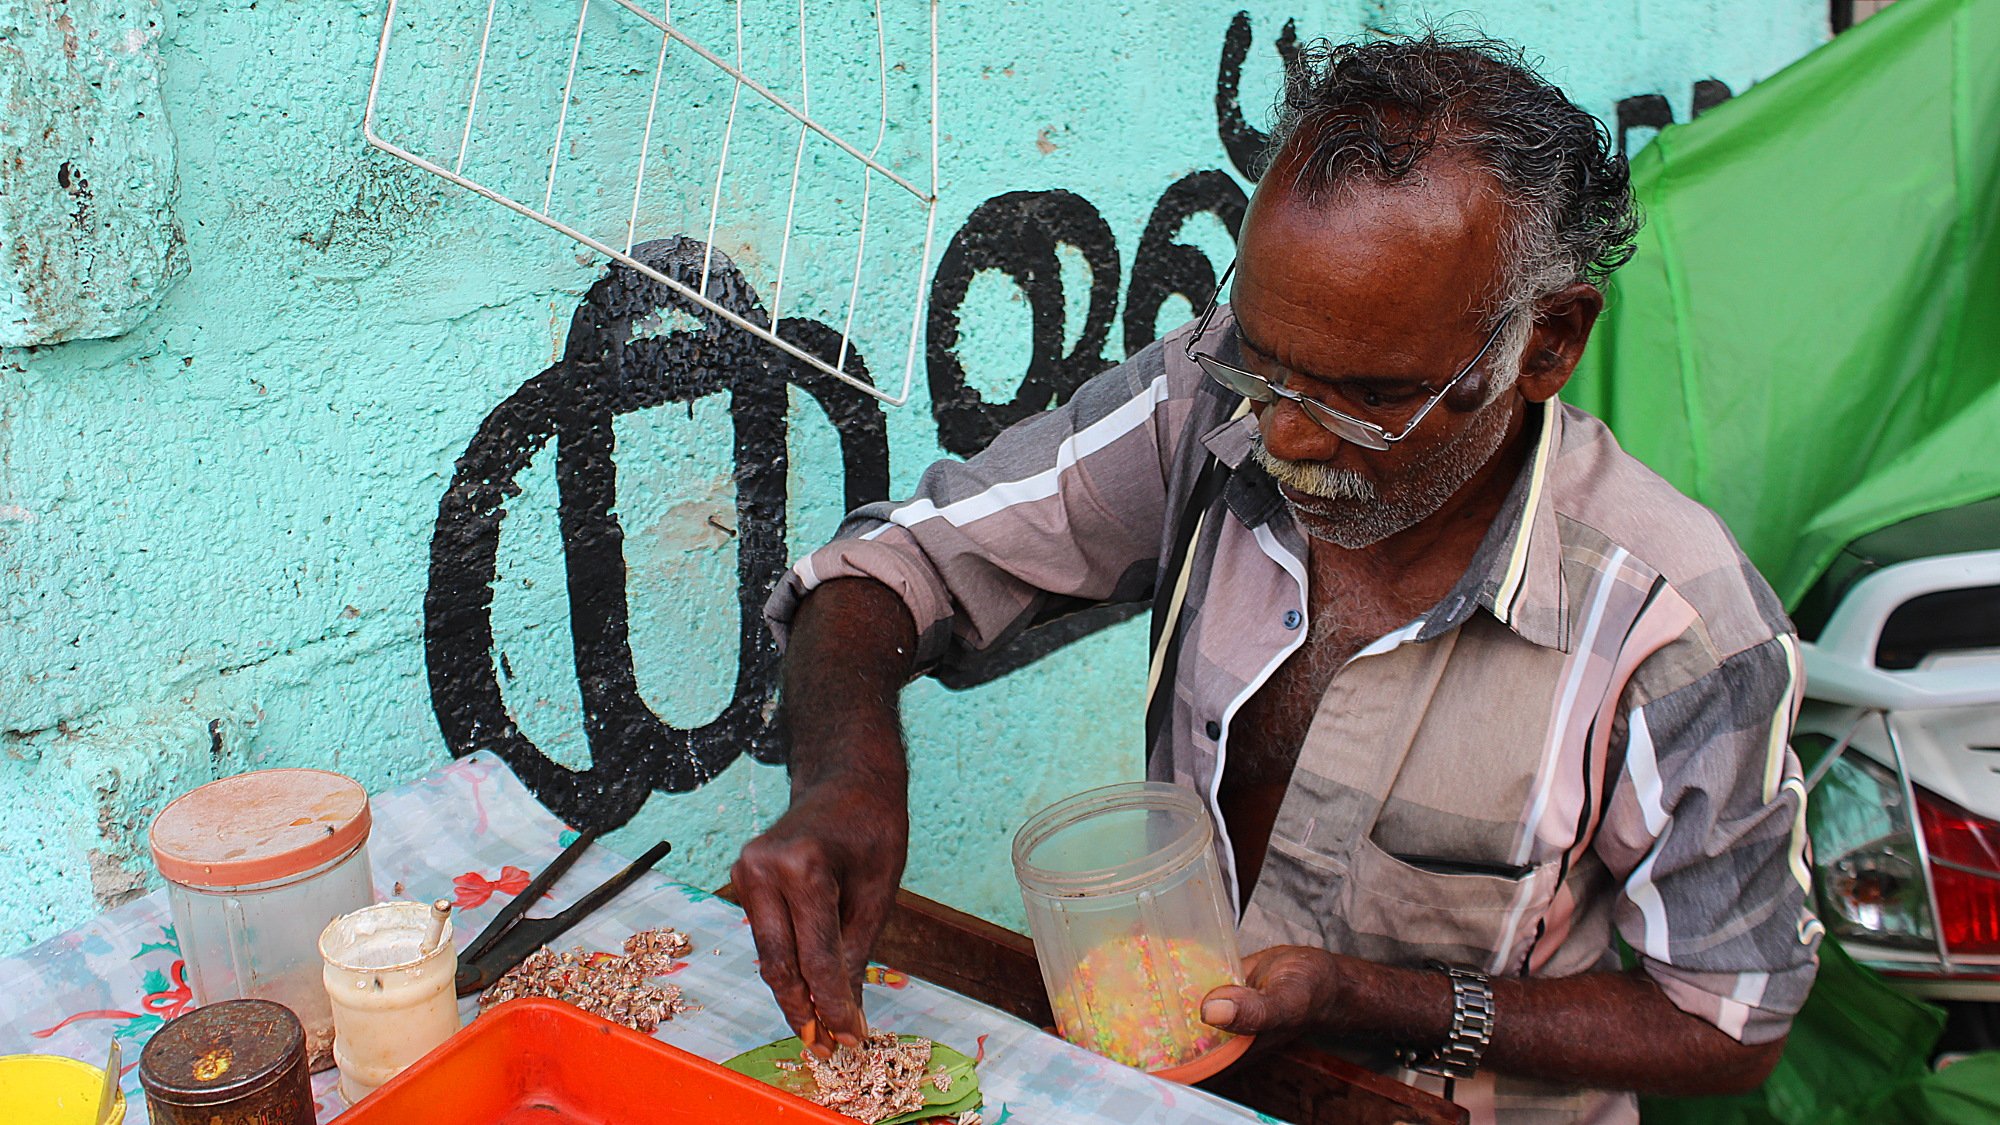 Street vendor making chewable tobacco paan from different ingredients including sprinkles in India.